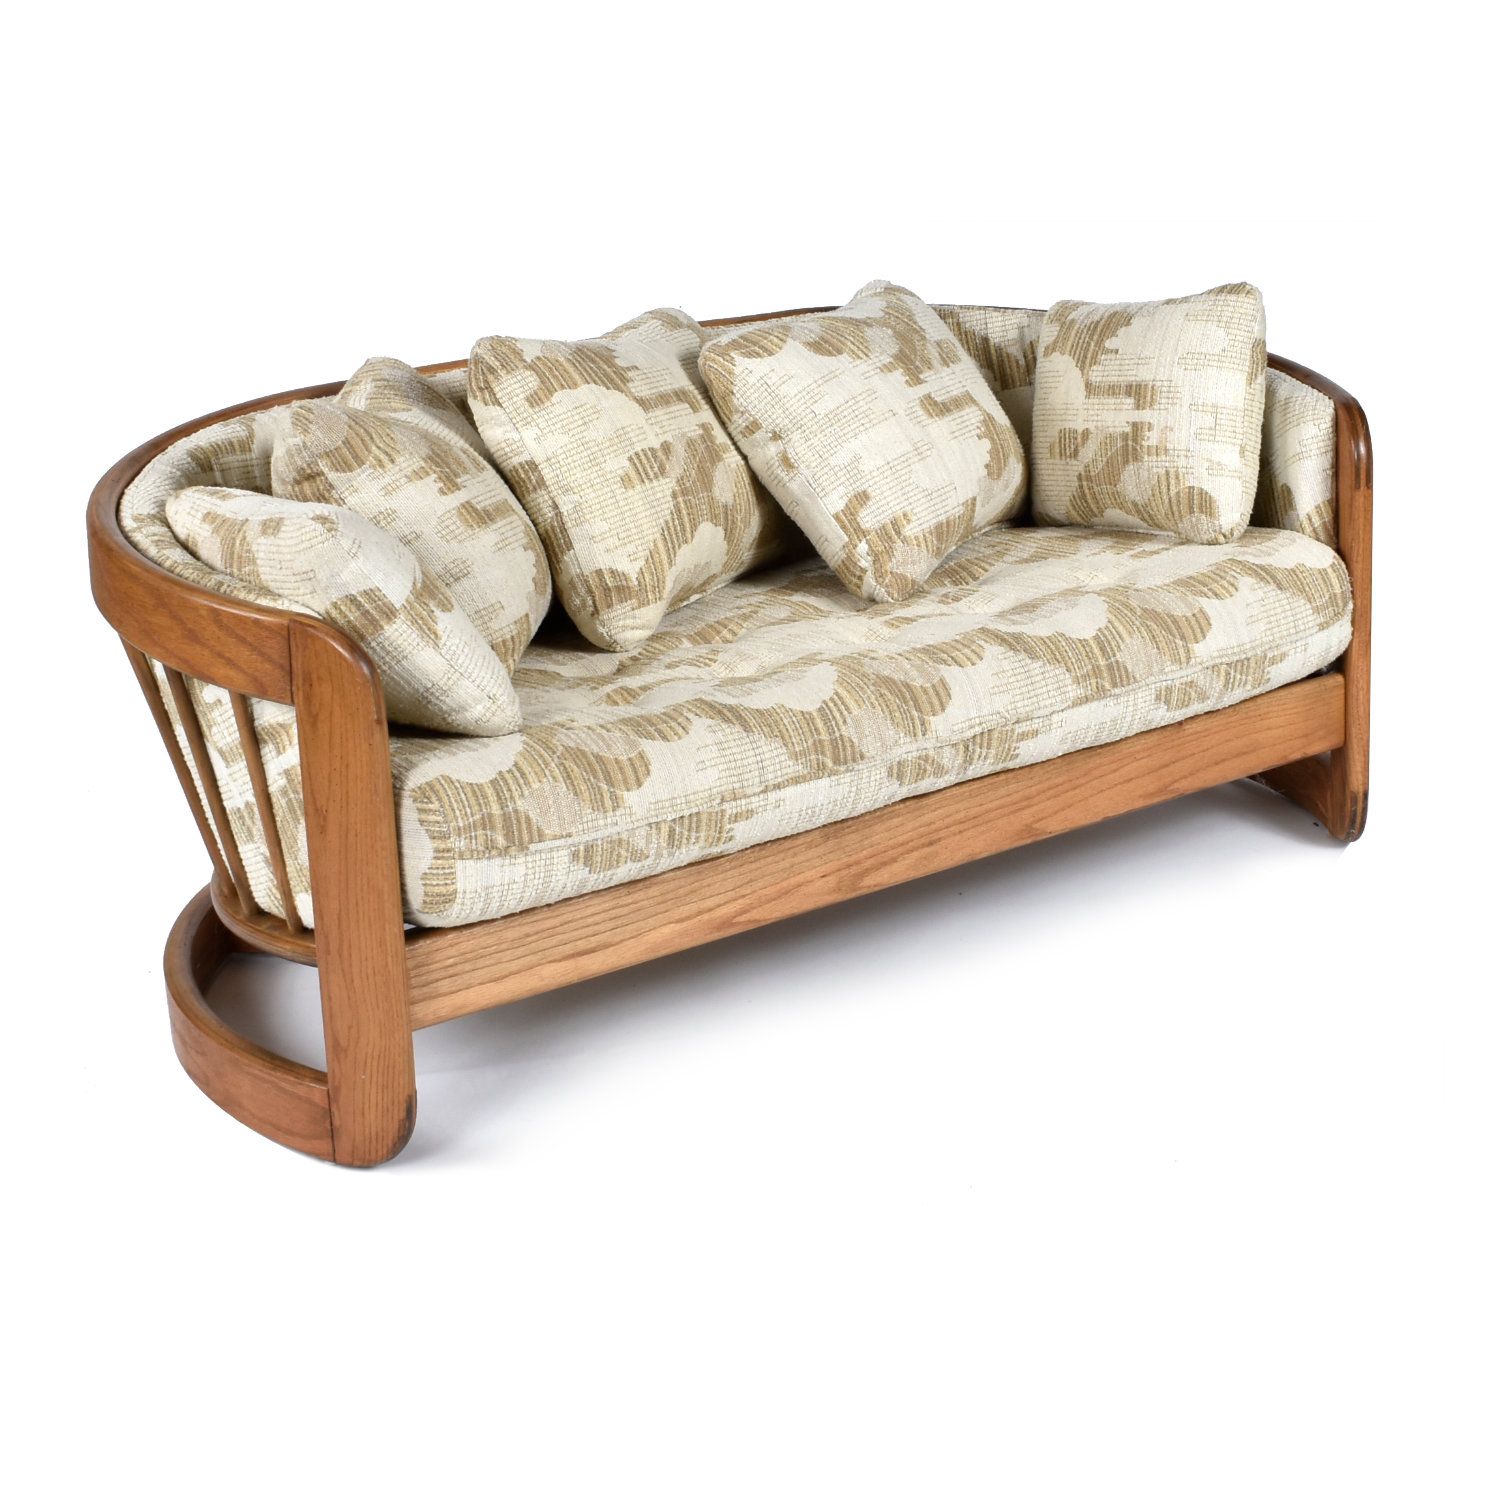 Beige Spindle Back Curved Solid Oak Wood Crescent Shaped Loveseat Within Couches Love Seats With Wood Frame (Gallery 5 of 20)